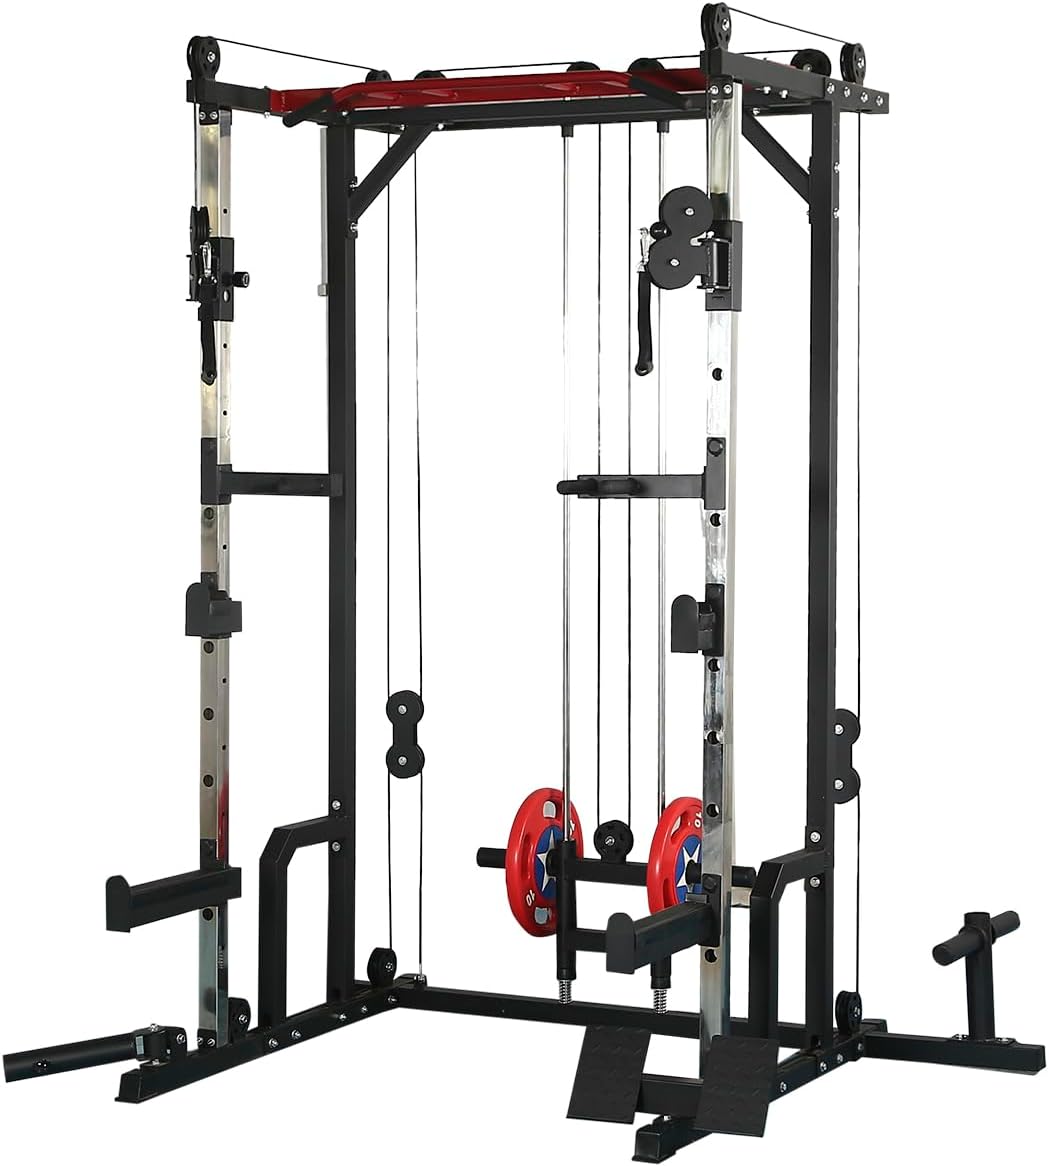 HAUSHECK, 1400lbs Power Cage with LAT Pulldown, Weight Storage, Multi-Functional Squat Racks for Full Body Workouts, Home Gym Equipment with Training Attachment, Orange